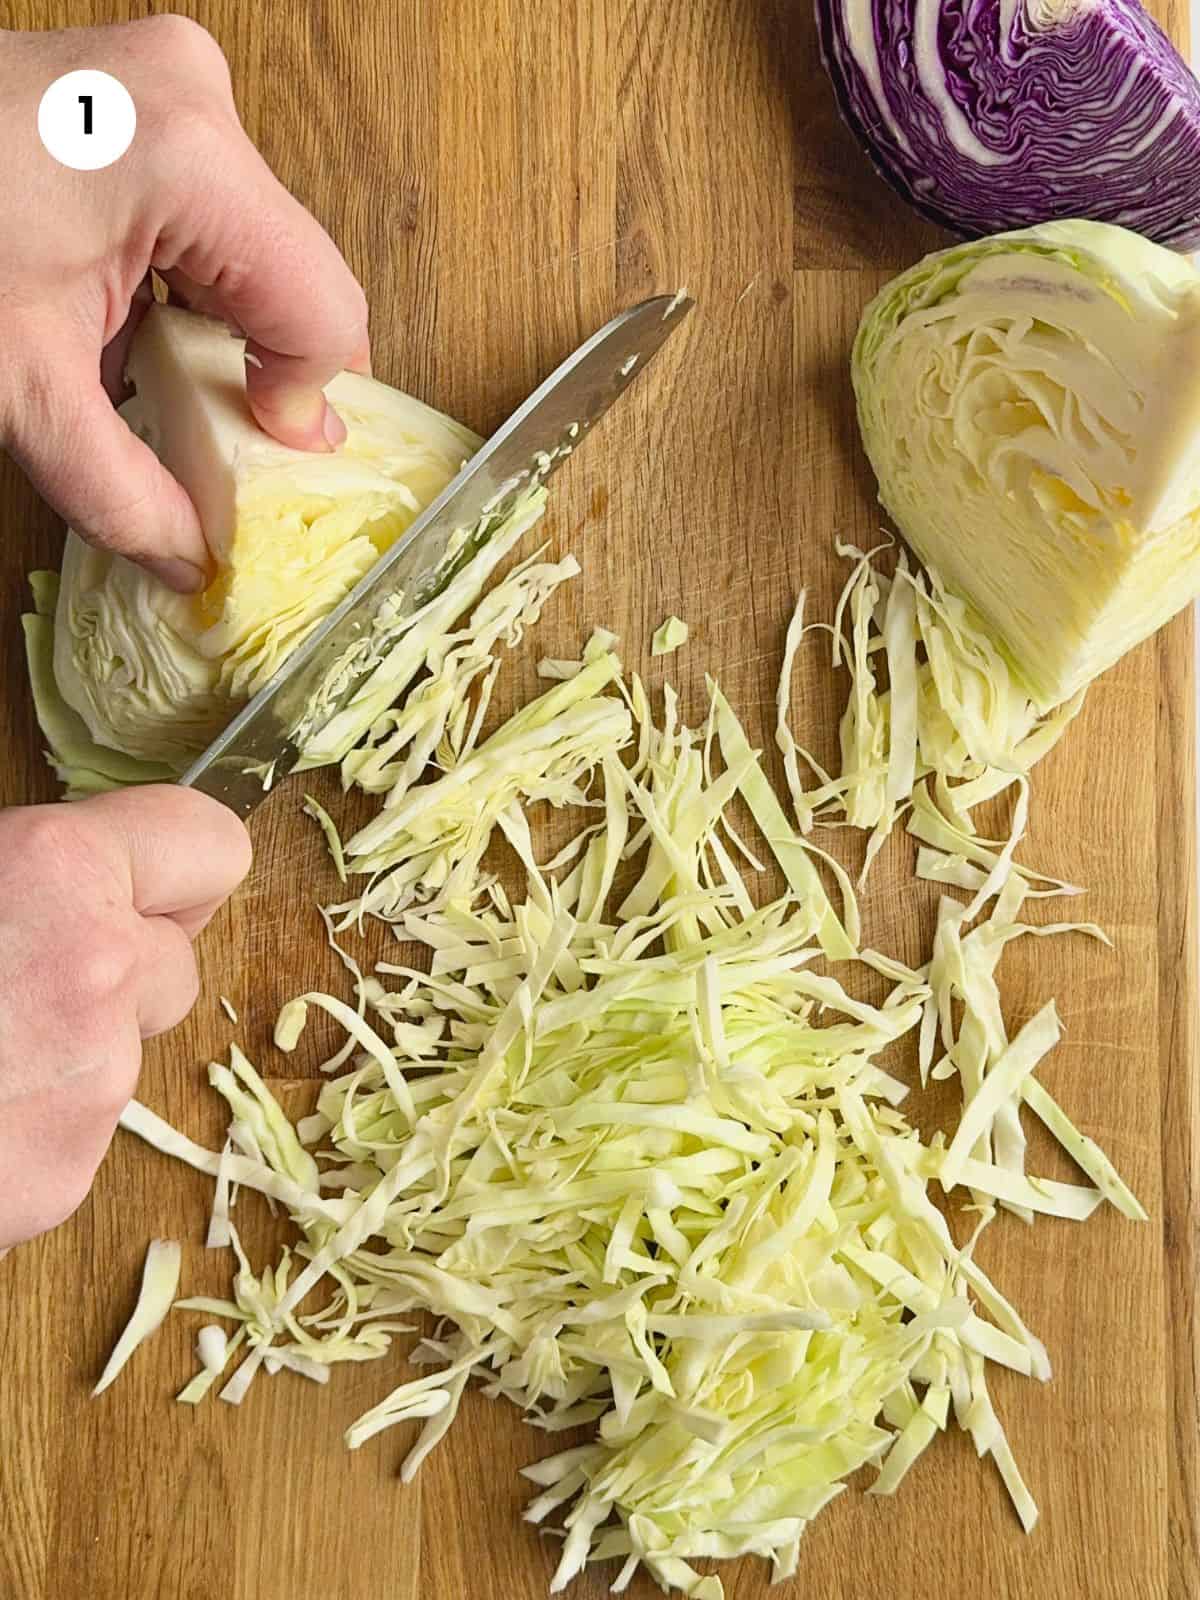 Shredding the green cabbage into thin slices.